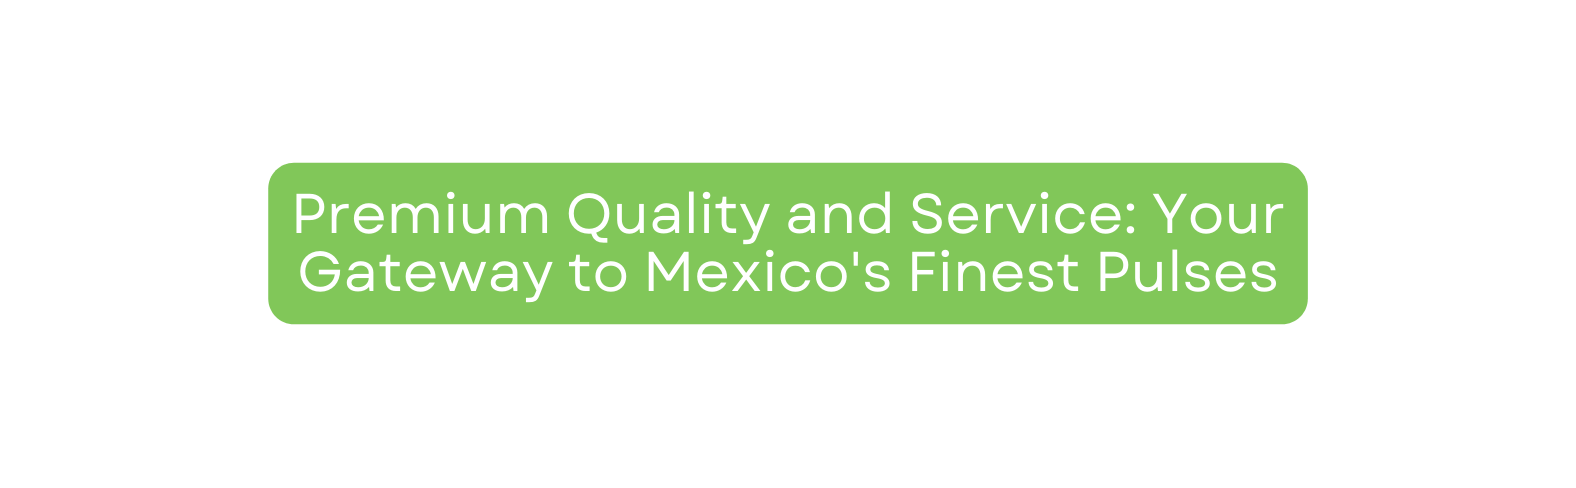 Premium Quality and Service Your Gateway to Mexico s Finest Pulses